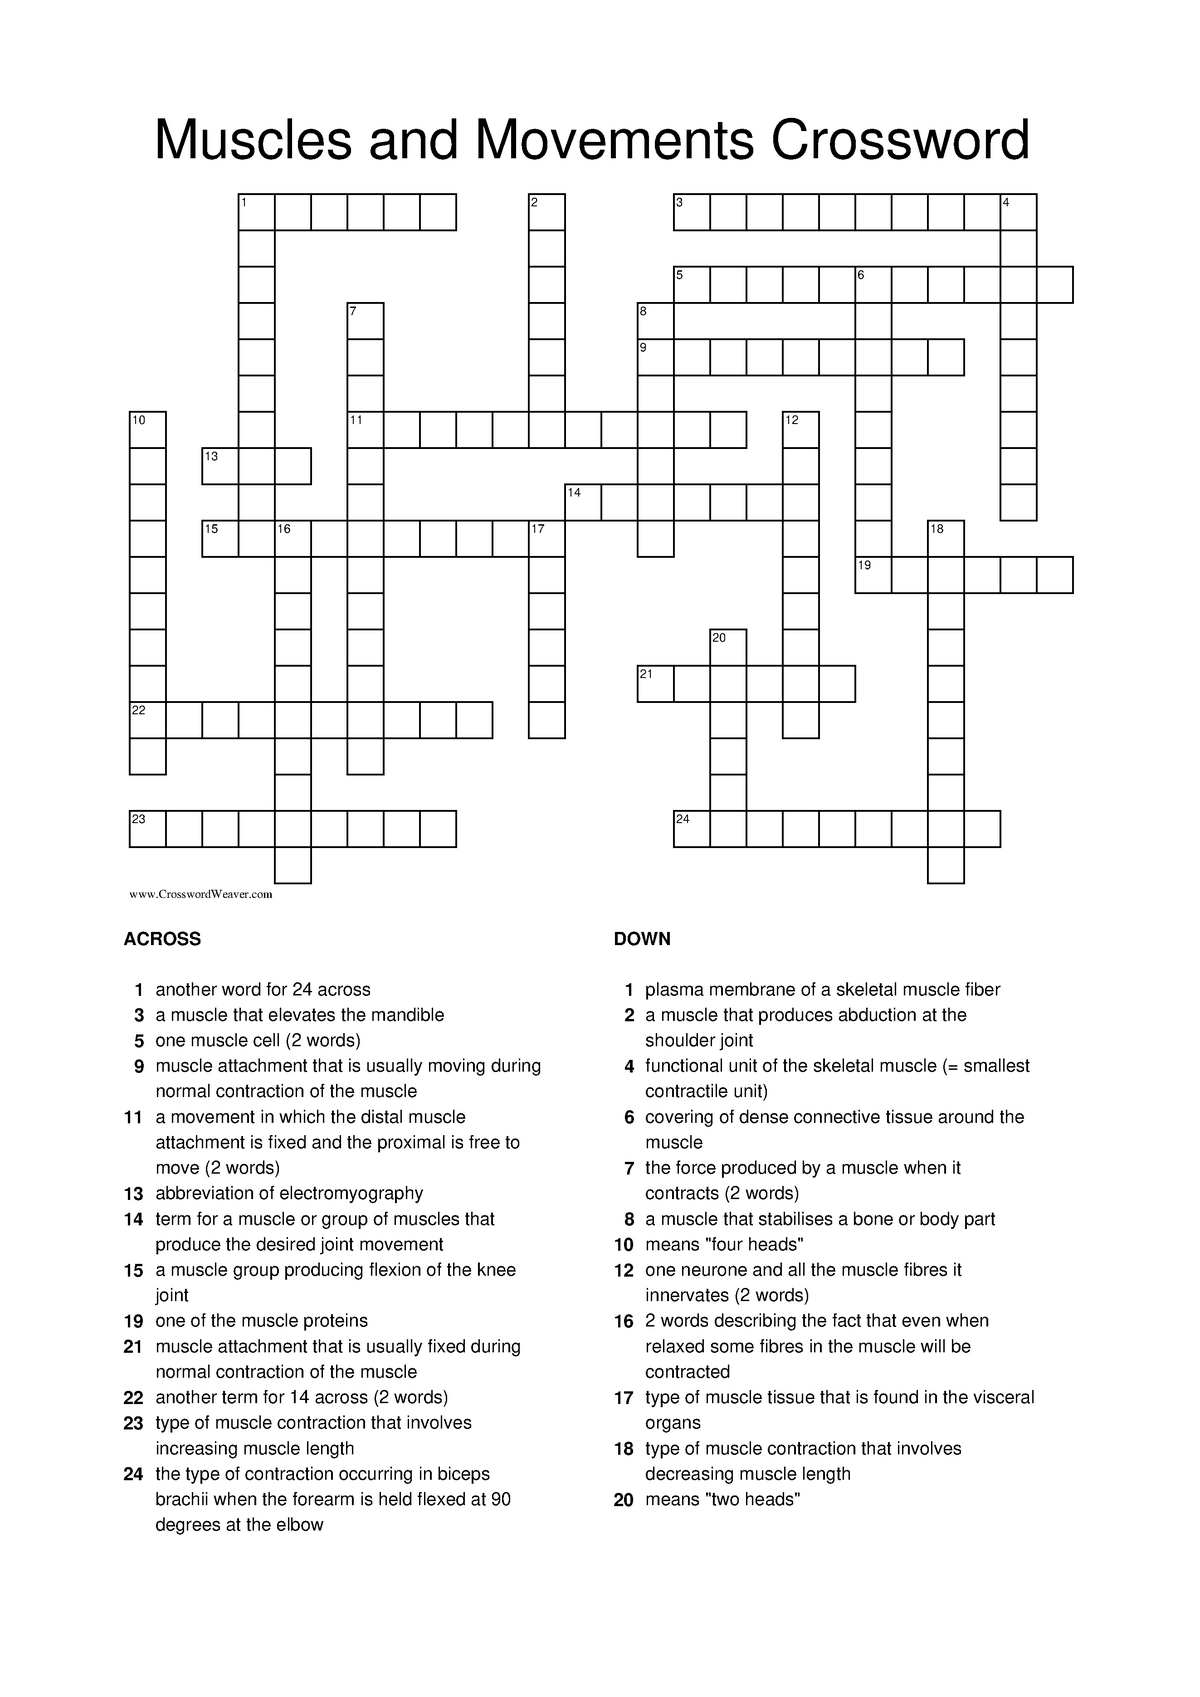 Muscular system crossword Muscles and Movements Crossword 1 2 3 4 5 6